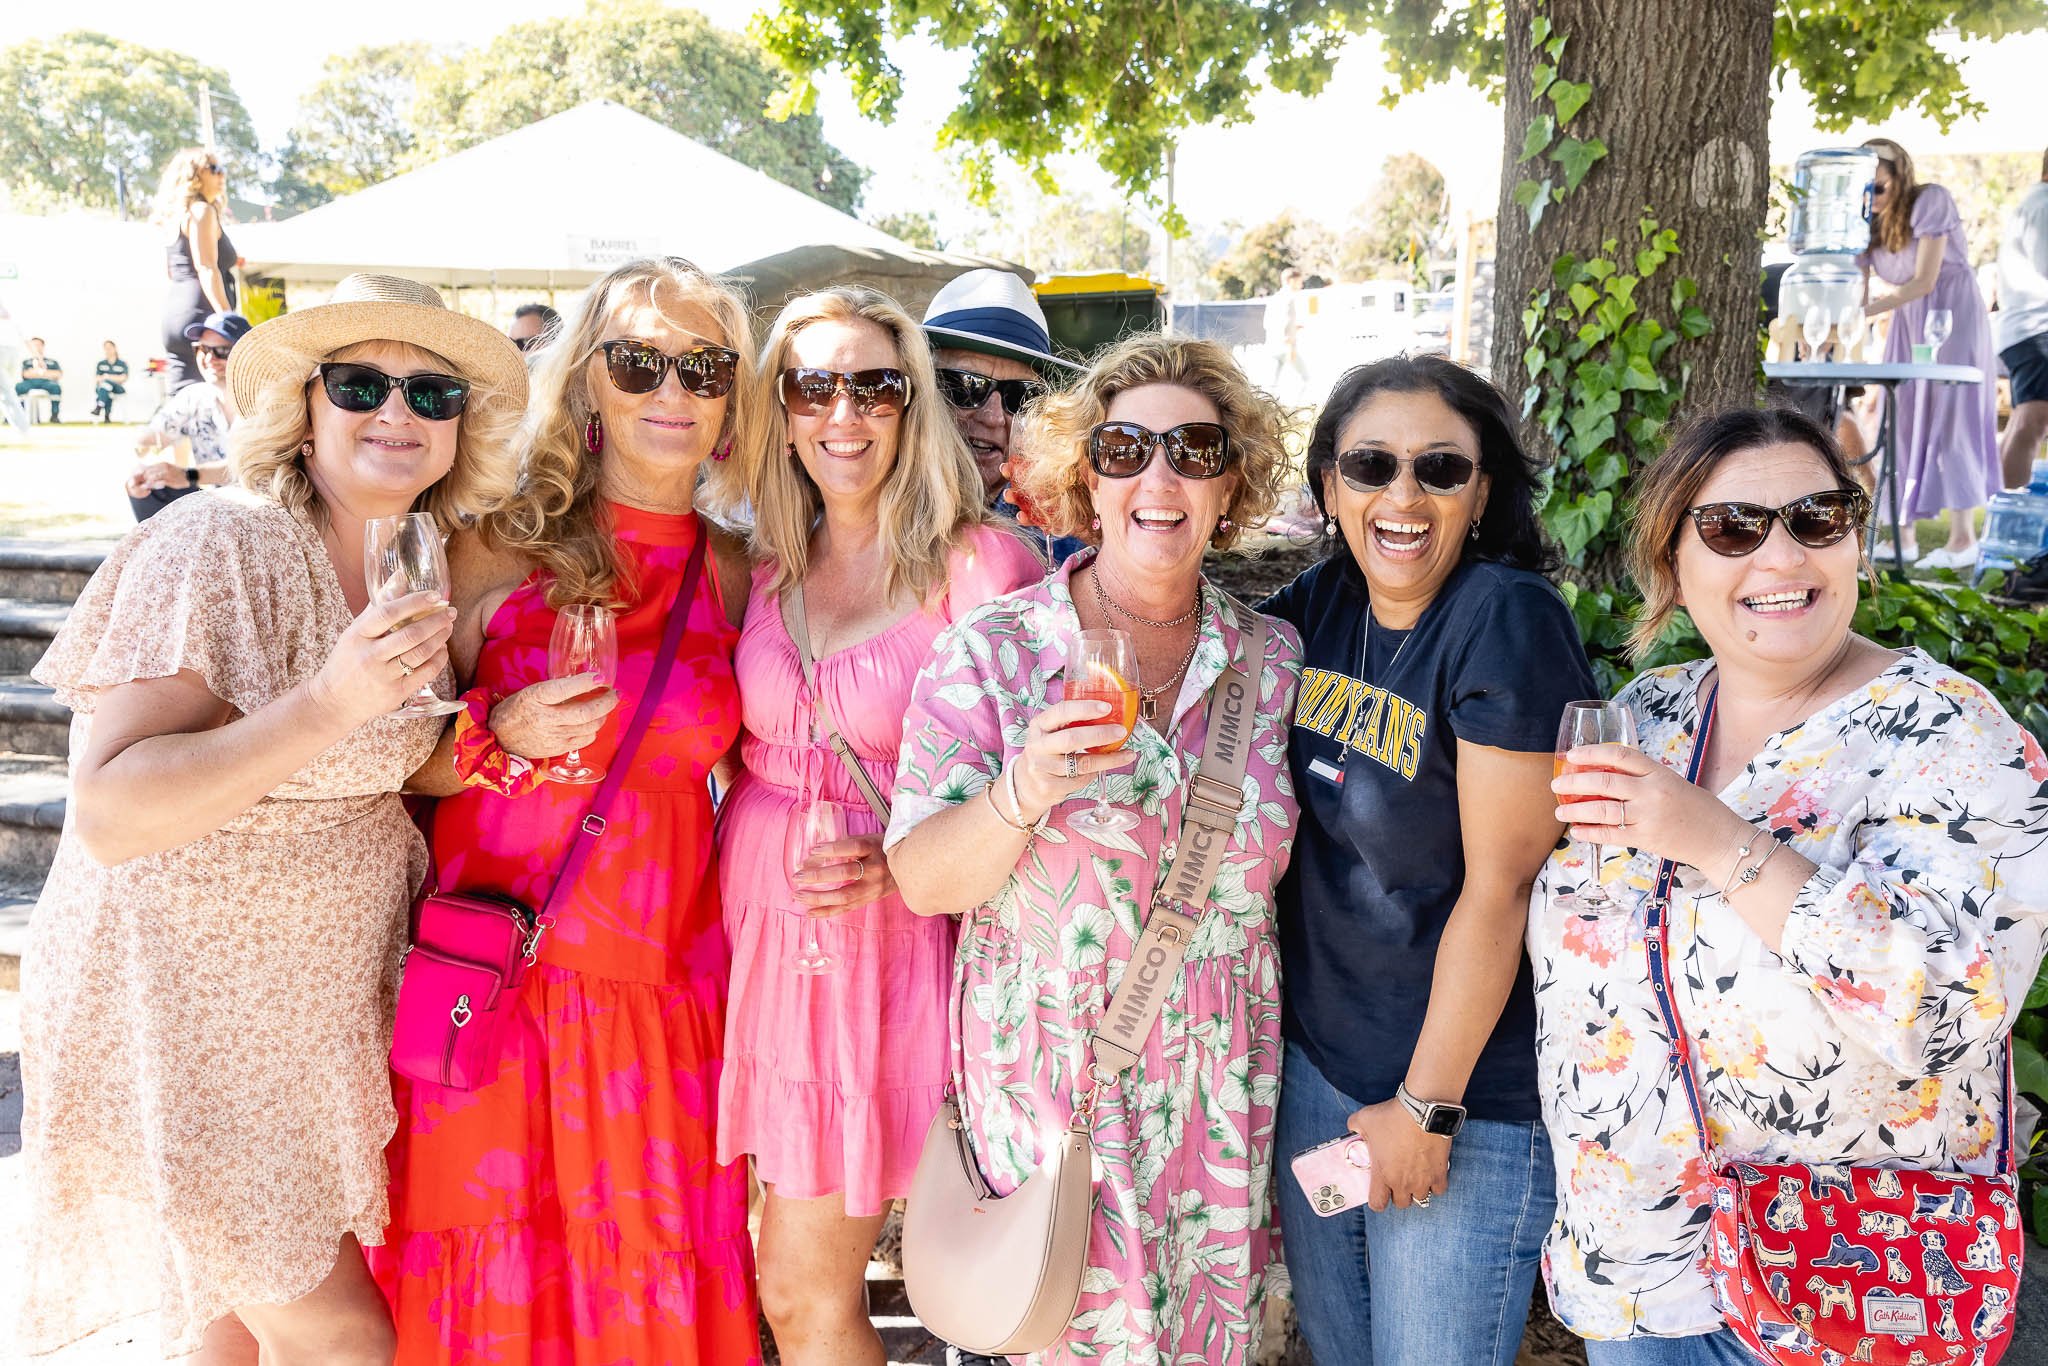 Ammon_Creative-Event_Photography-CMS_Events-UnWined_Subiaco-Image_36.jpg